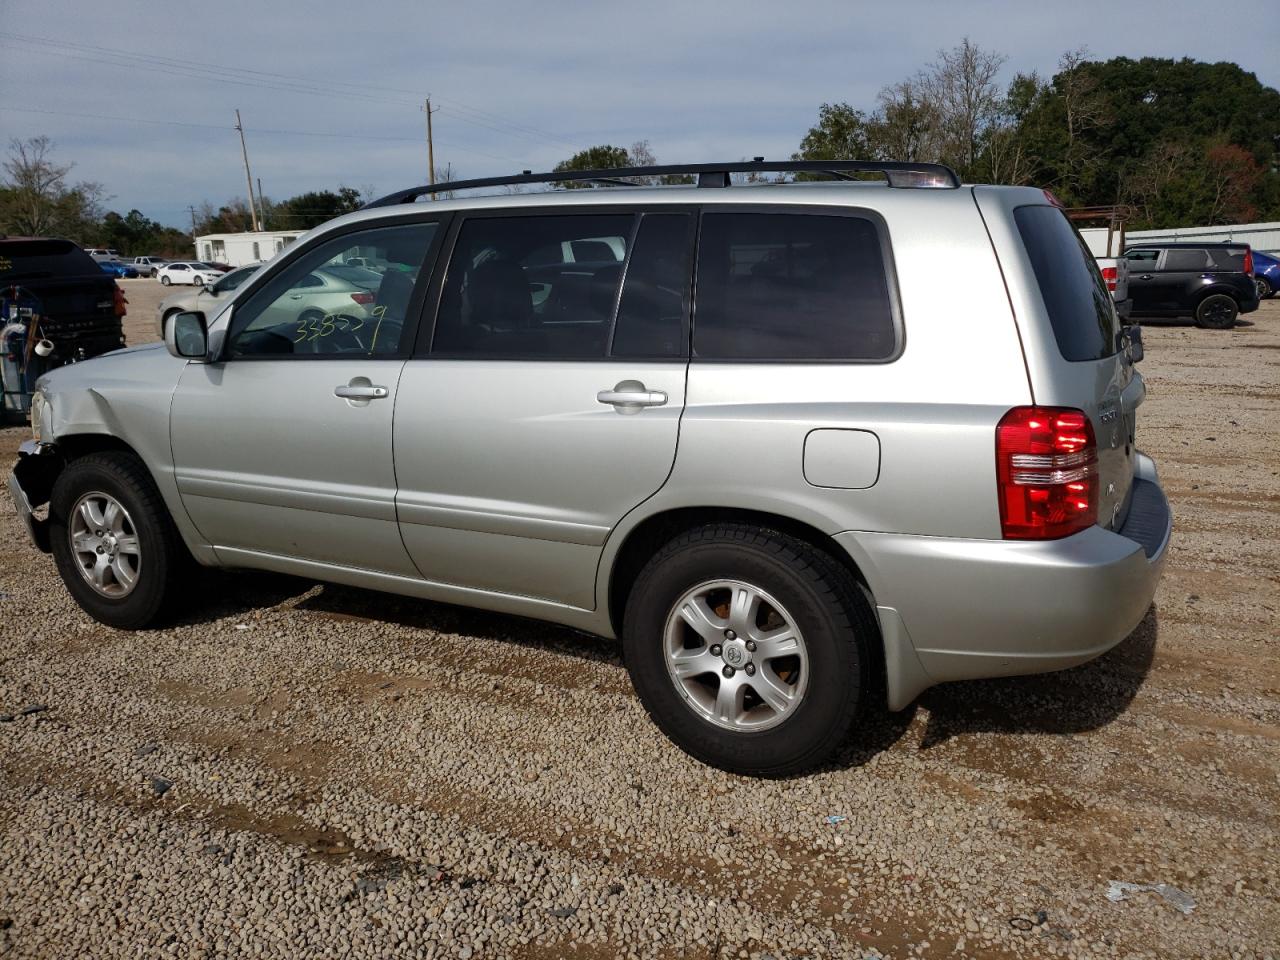 JTEGF21A130****** Used and Repairable 2003 Toyota Highlander in AL - Theodore